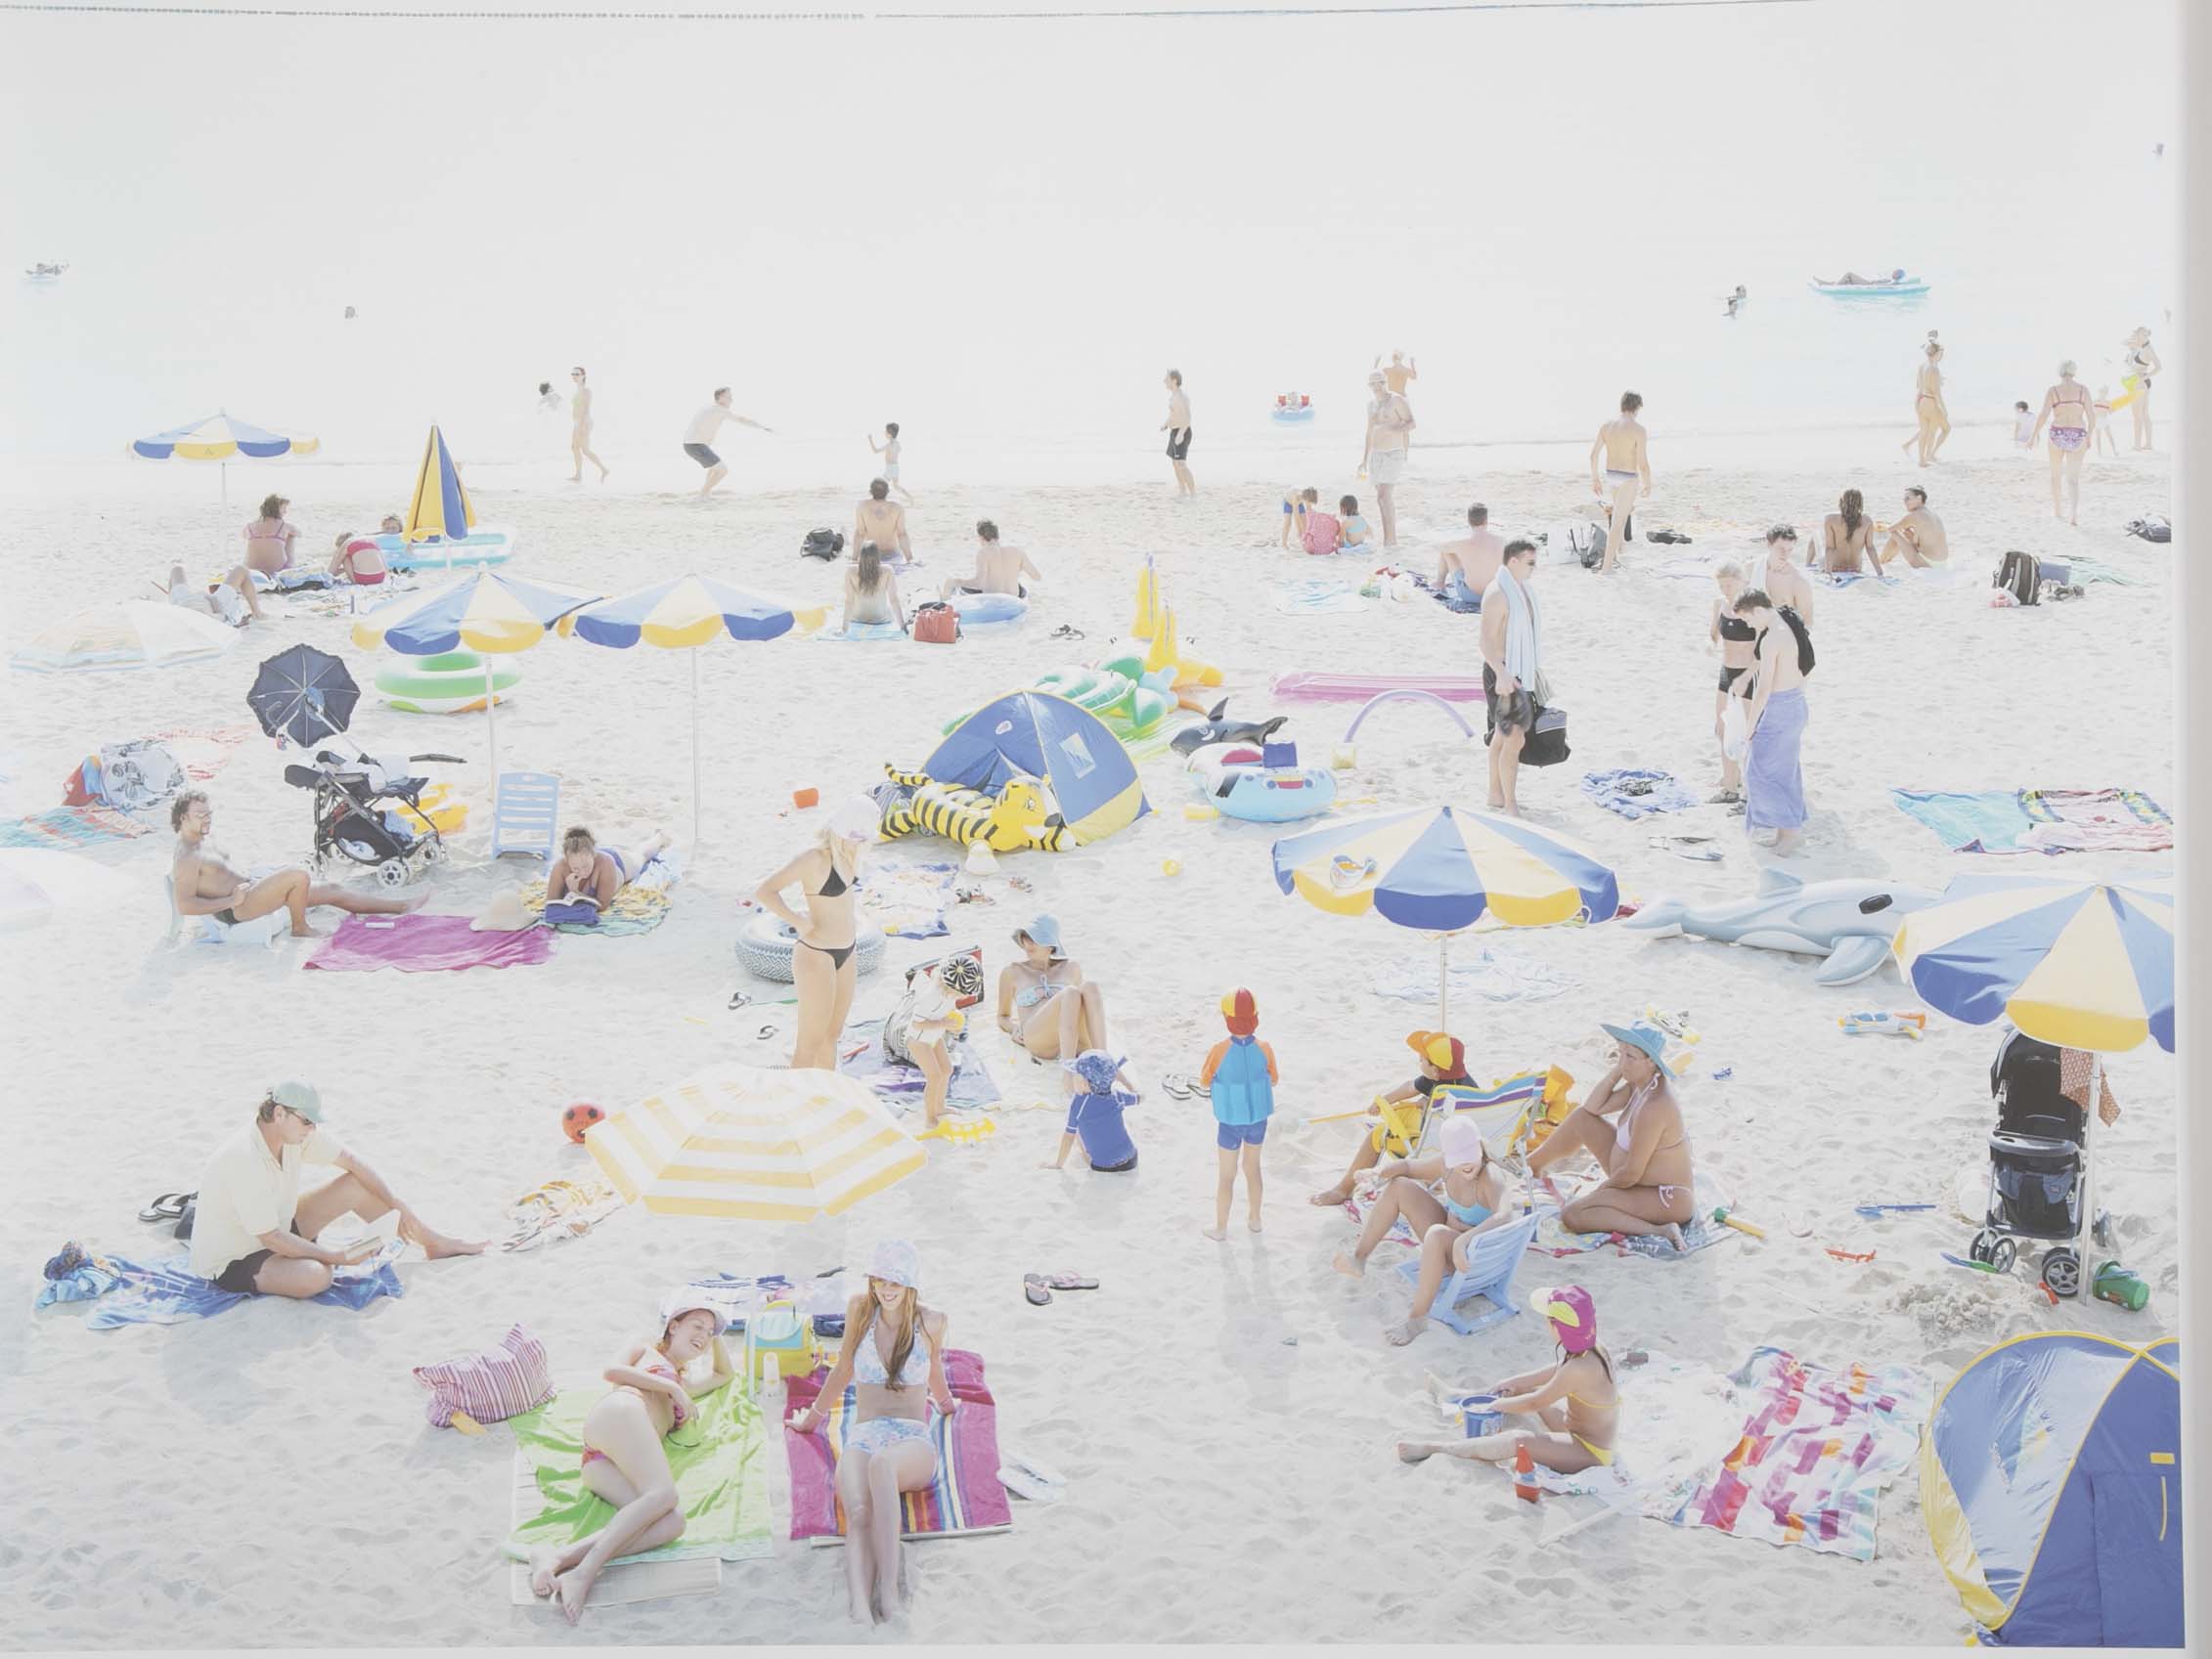 "Amadores 2" Offset Lithograph by Massimo Vitali